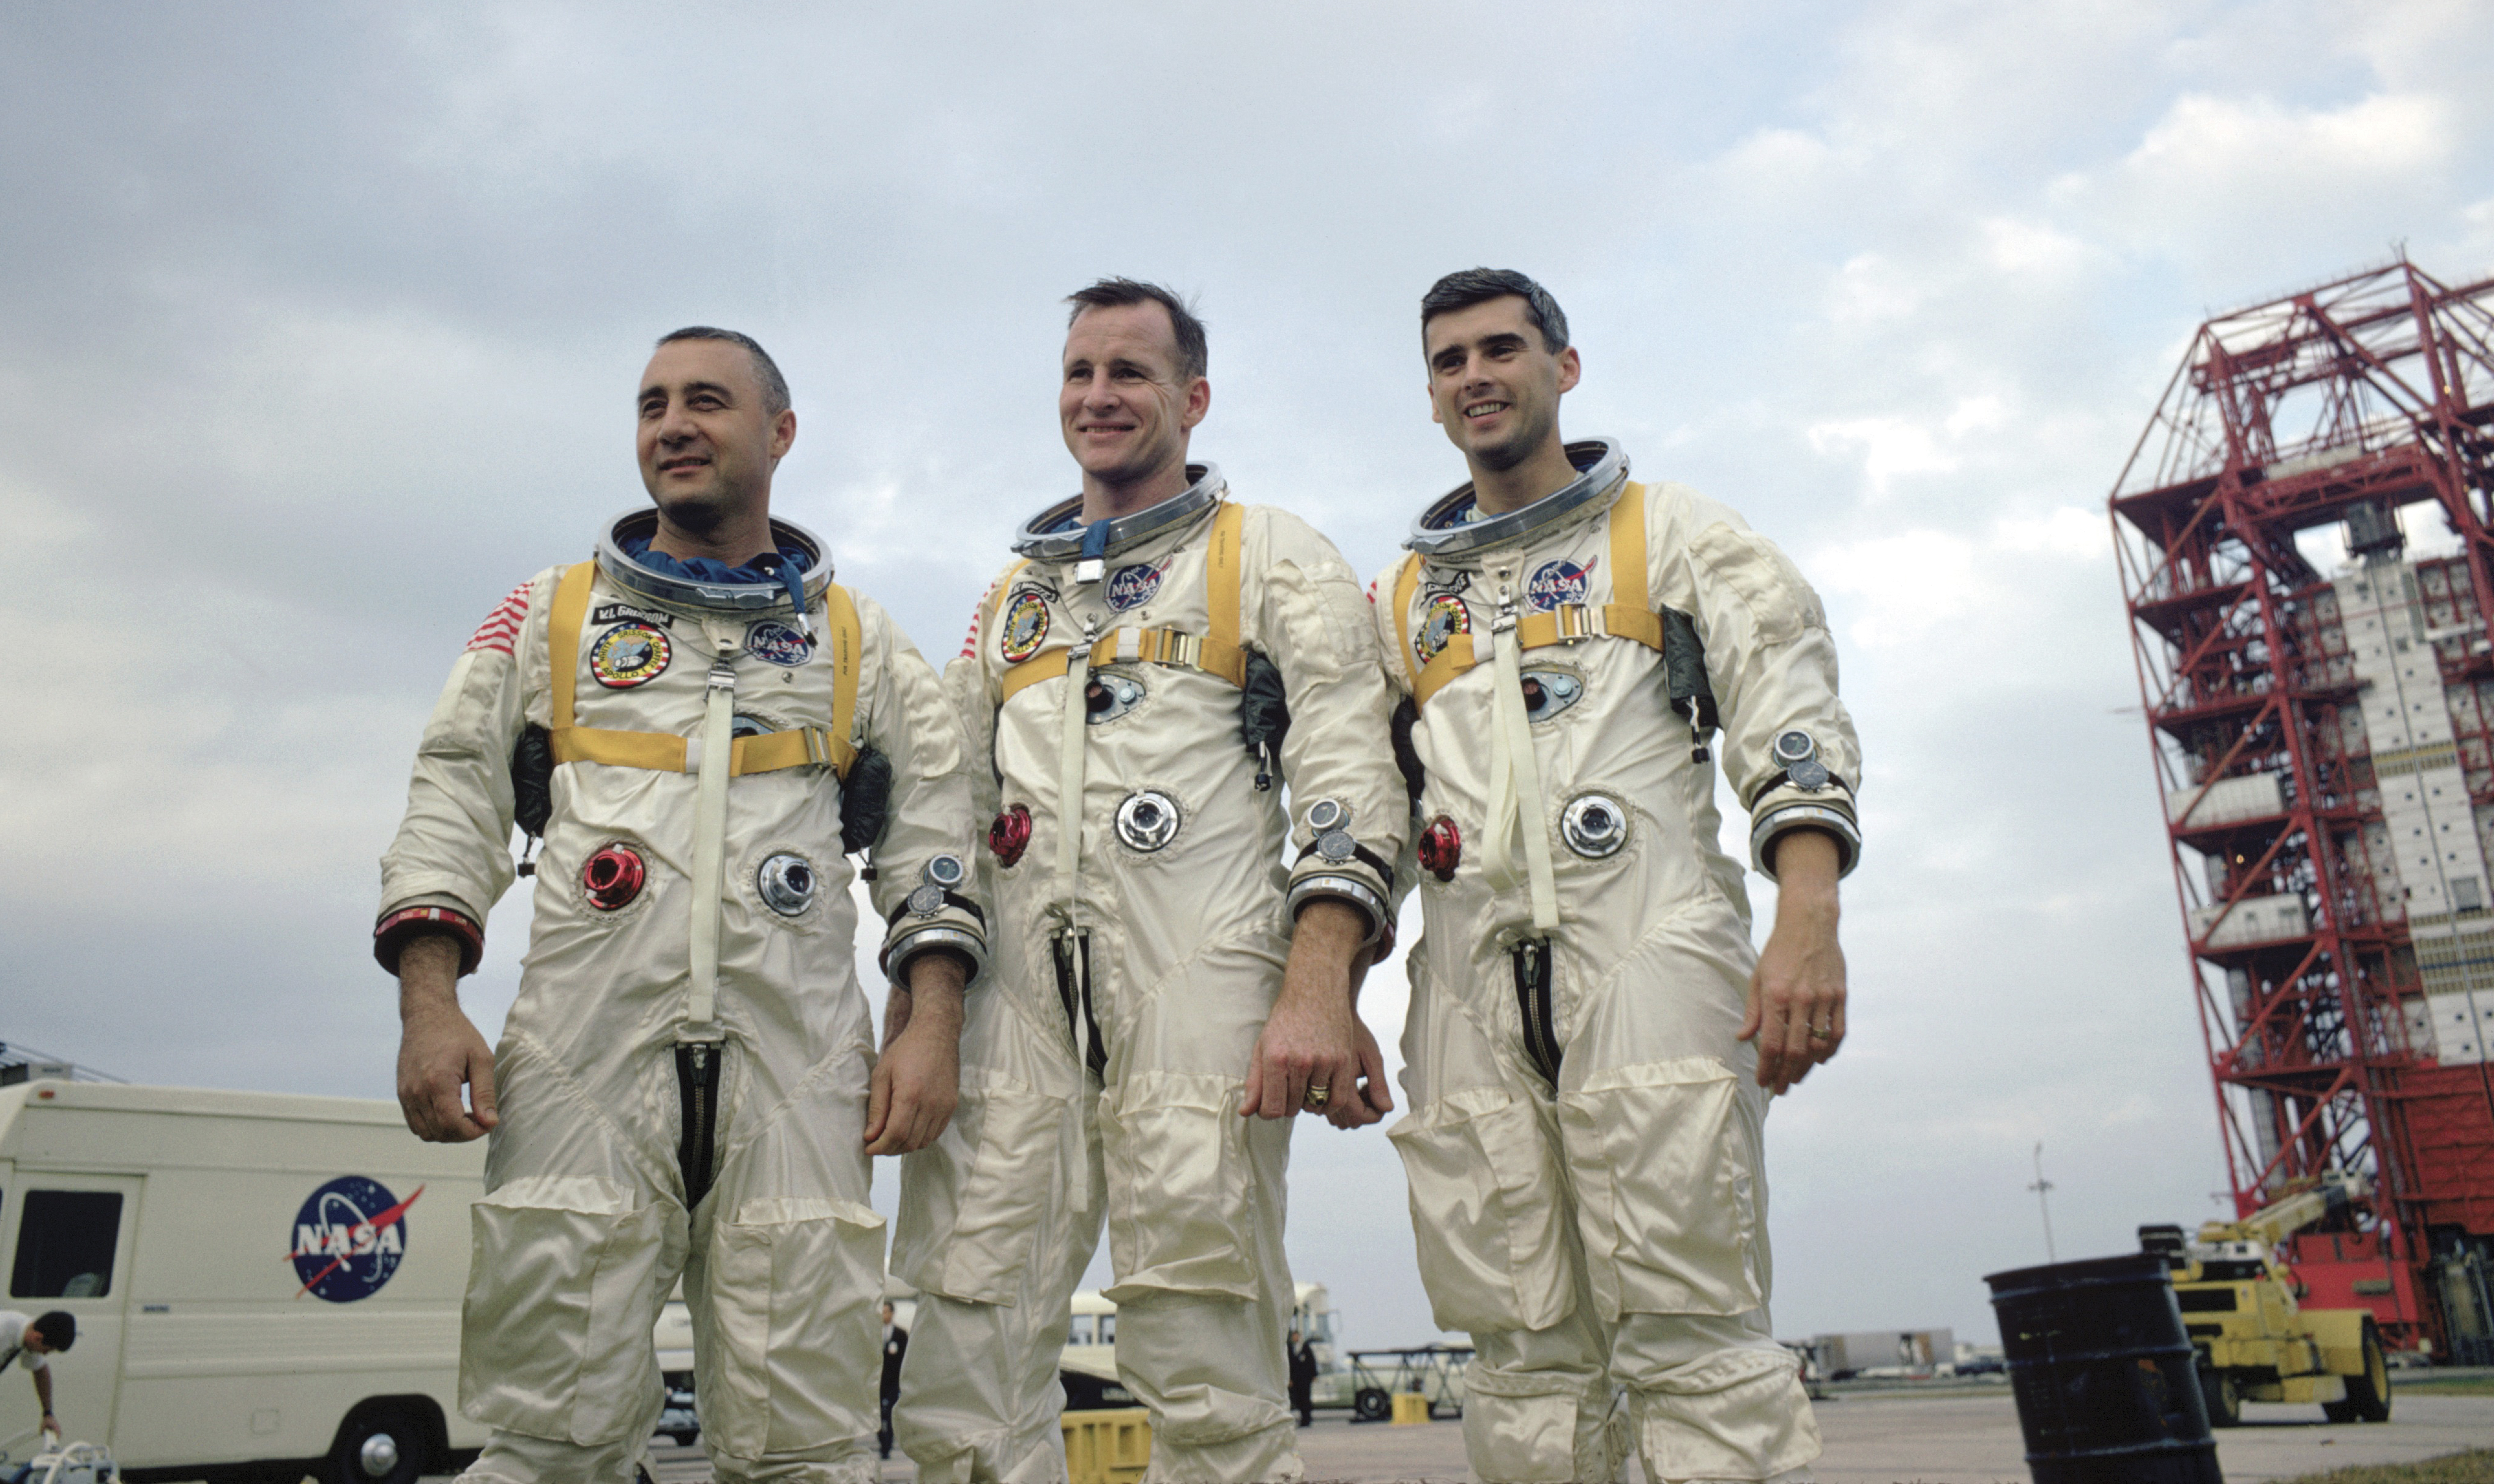 Crew Of Apollo 1, Virgil I (Gus) Grissom, Edward H, White Ii, And Roger B, Chaffee, During Training In Florida, On January 27, 1967, The Crew Was Killed When A Fire Erupted In Their Capsule During Testing. (Encyclopaedia Britannica—UIG via Getty Images)